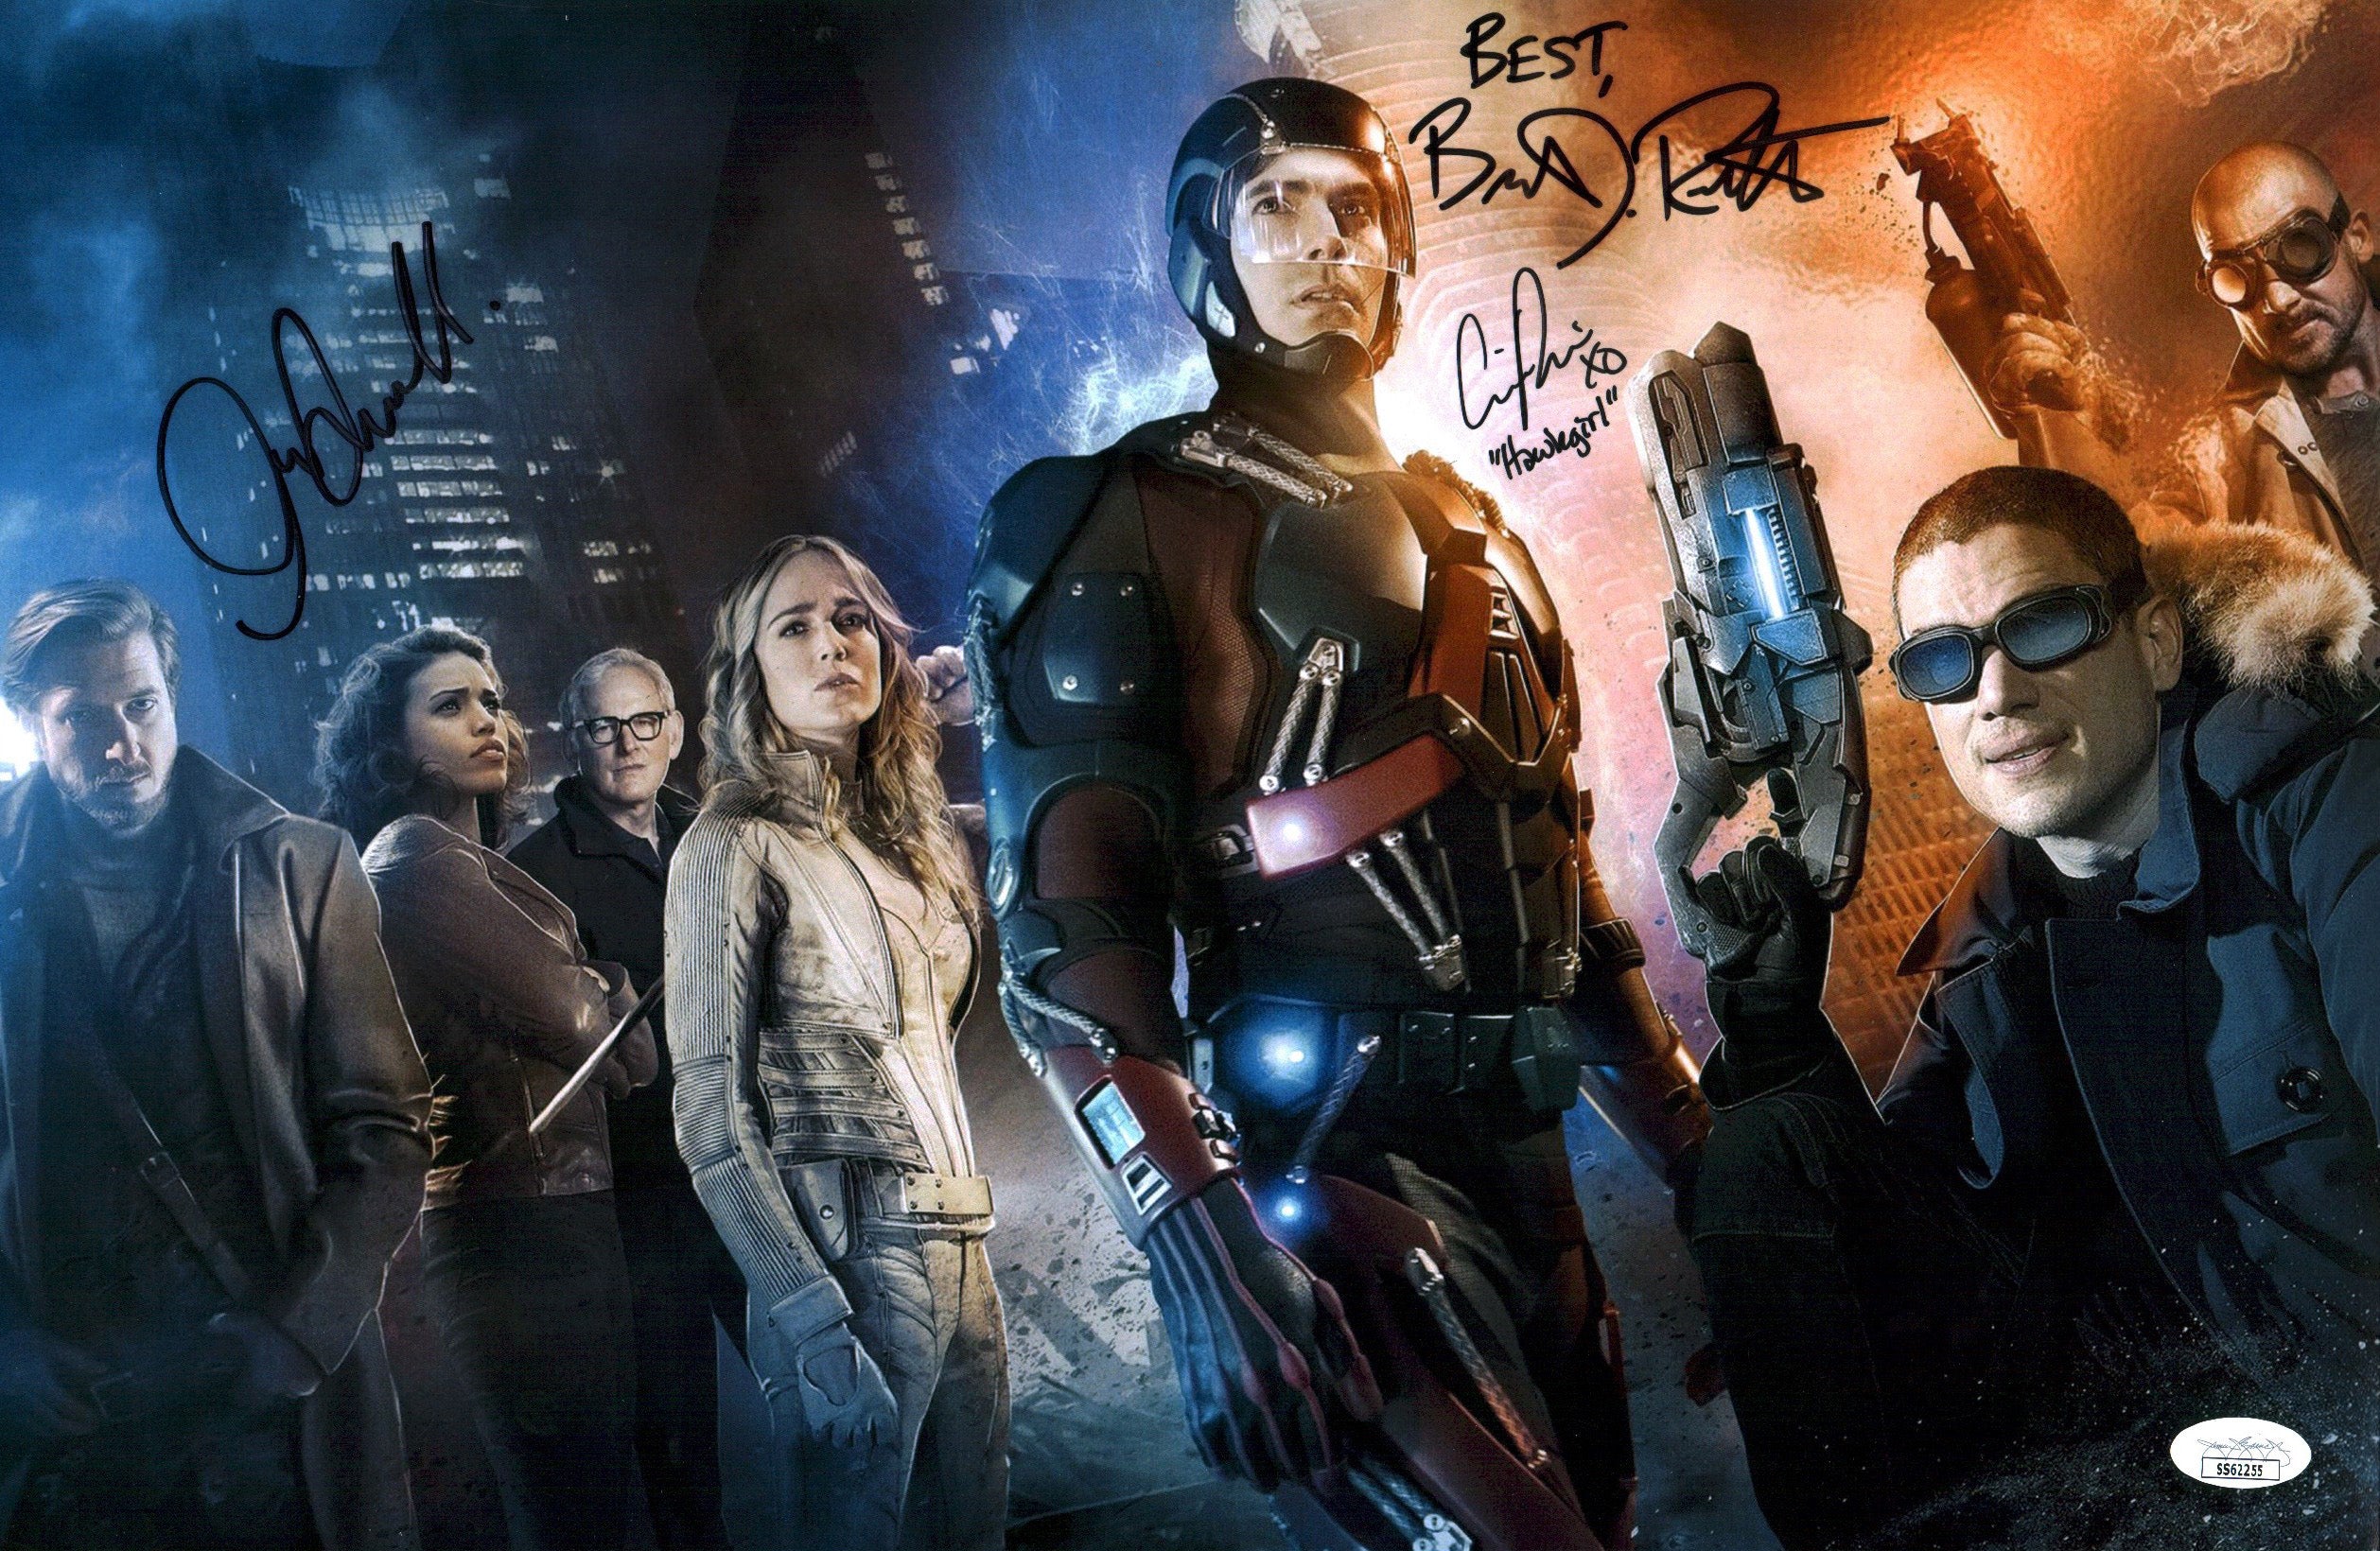 DC Legends of Tomorrow 11x17 Signed Photo Poster Darvill Renee Routh JSA COA Certified Autograph